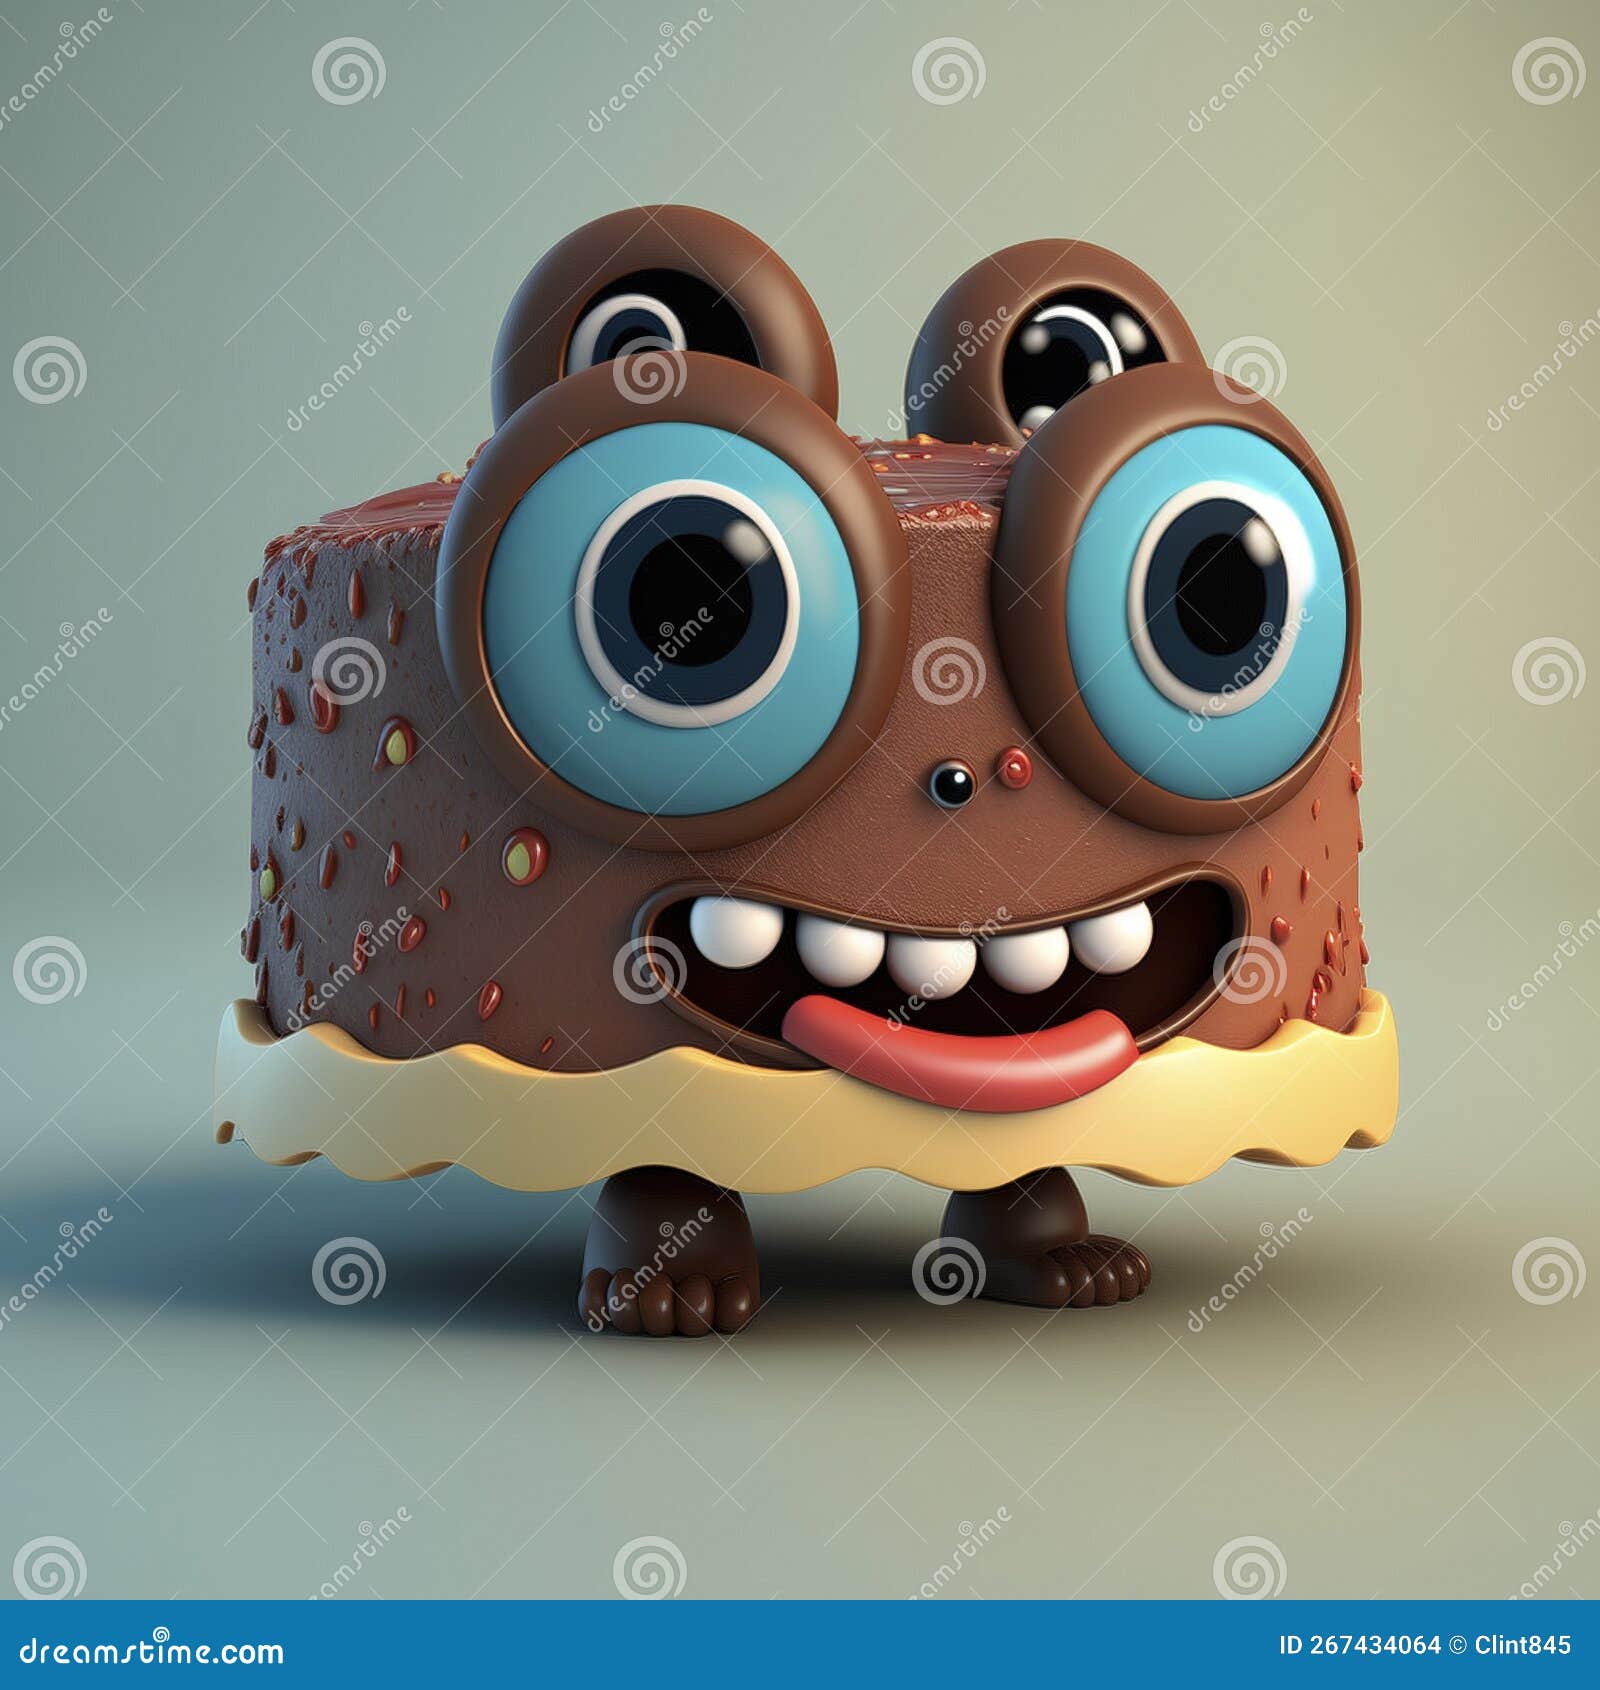 A Photorealistic 3D Cake with Big Eyes and a Smile - Global Illumination  Stock Illustration - Illustration of global, color: 267434064